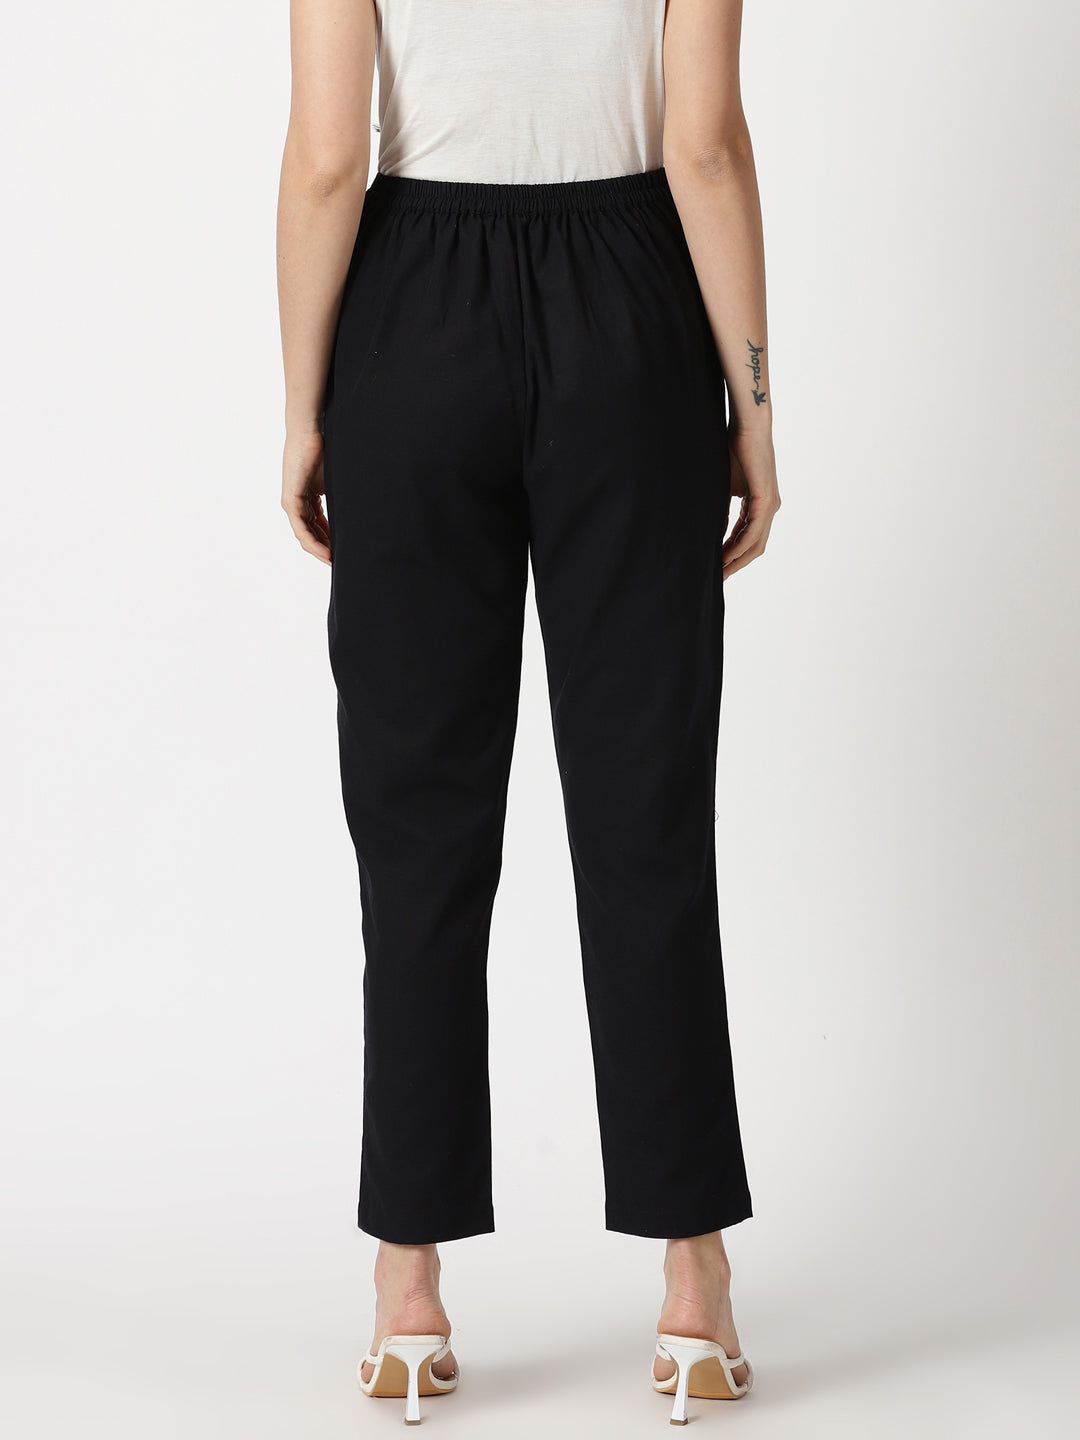 Black Cotton Flax Straight Fit Slip-on Trouser